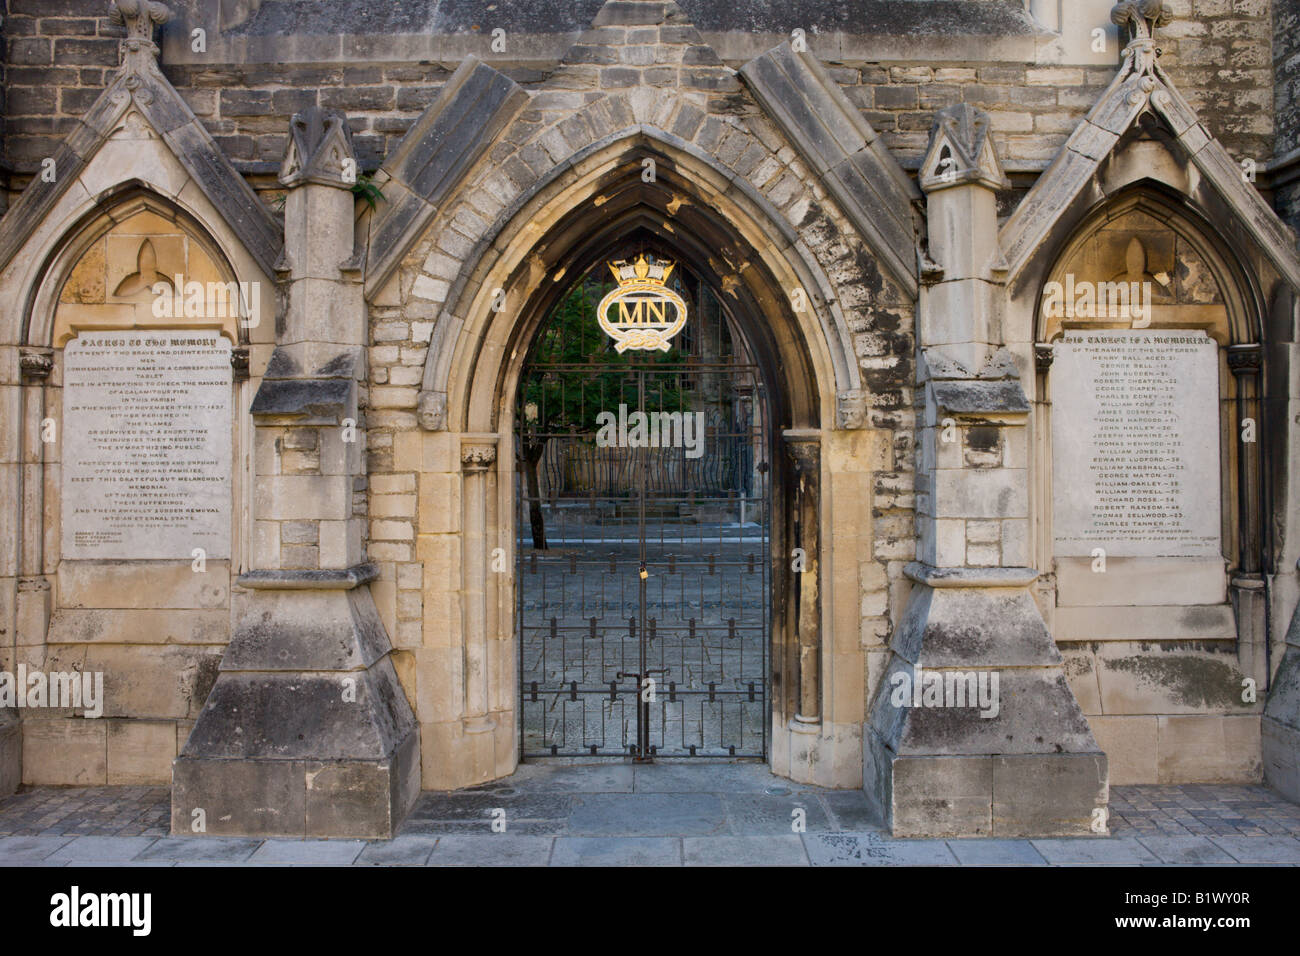 Memorial tablets and entrance gateway to the ruins of Holy Rood Church Southampton Hampshire England Stock Photo